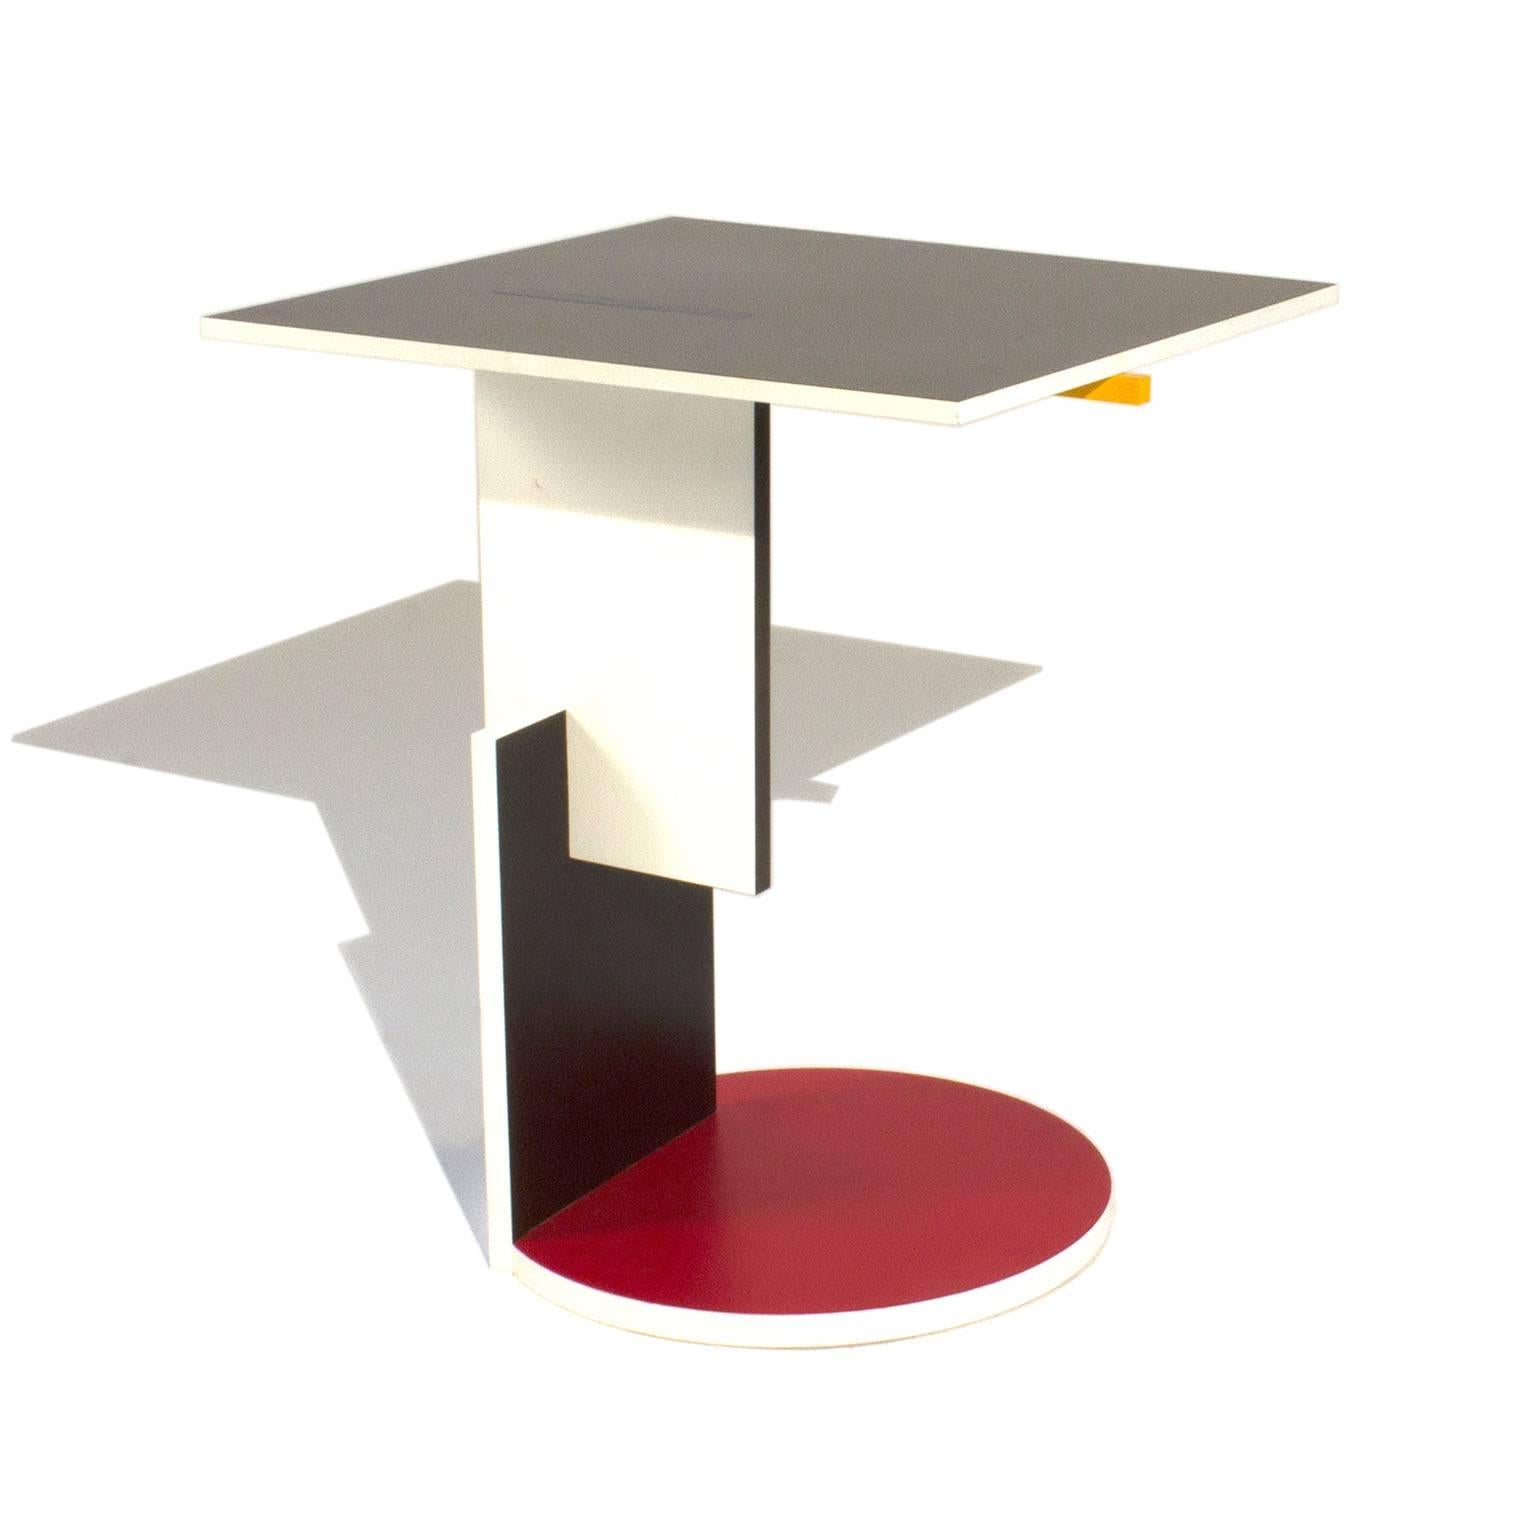 Schroeder One Low Table by Gerrit Rietveld for Cassina, Italy In Good Condition For Sale In Brooklyn, NY